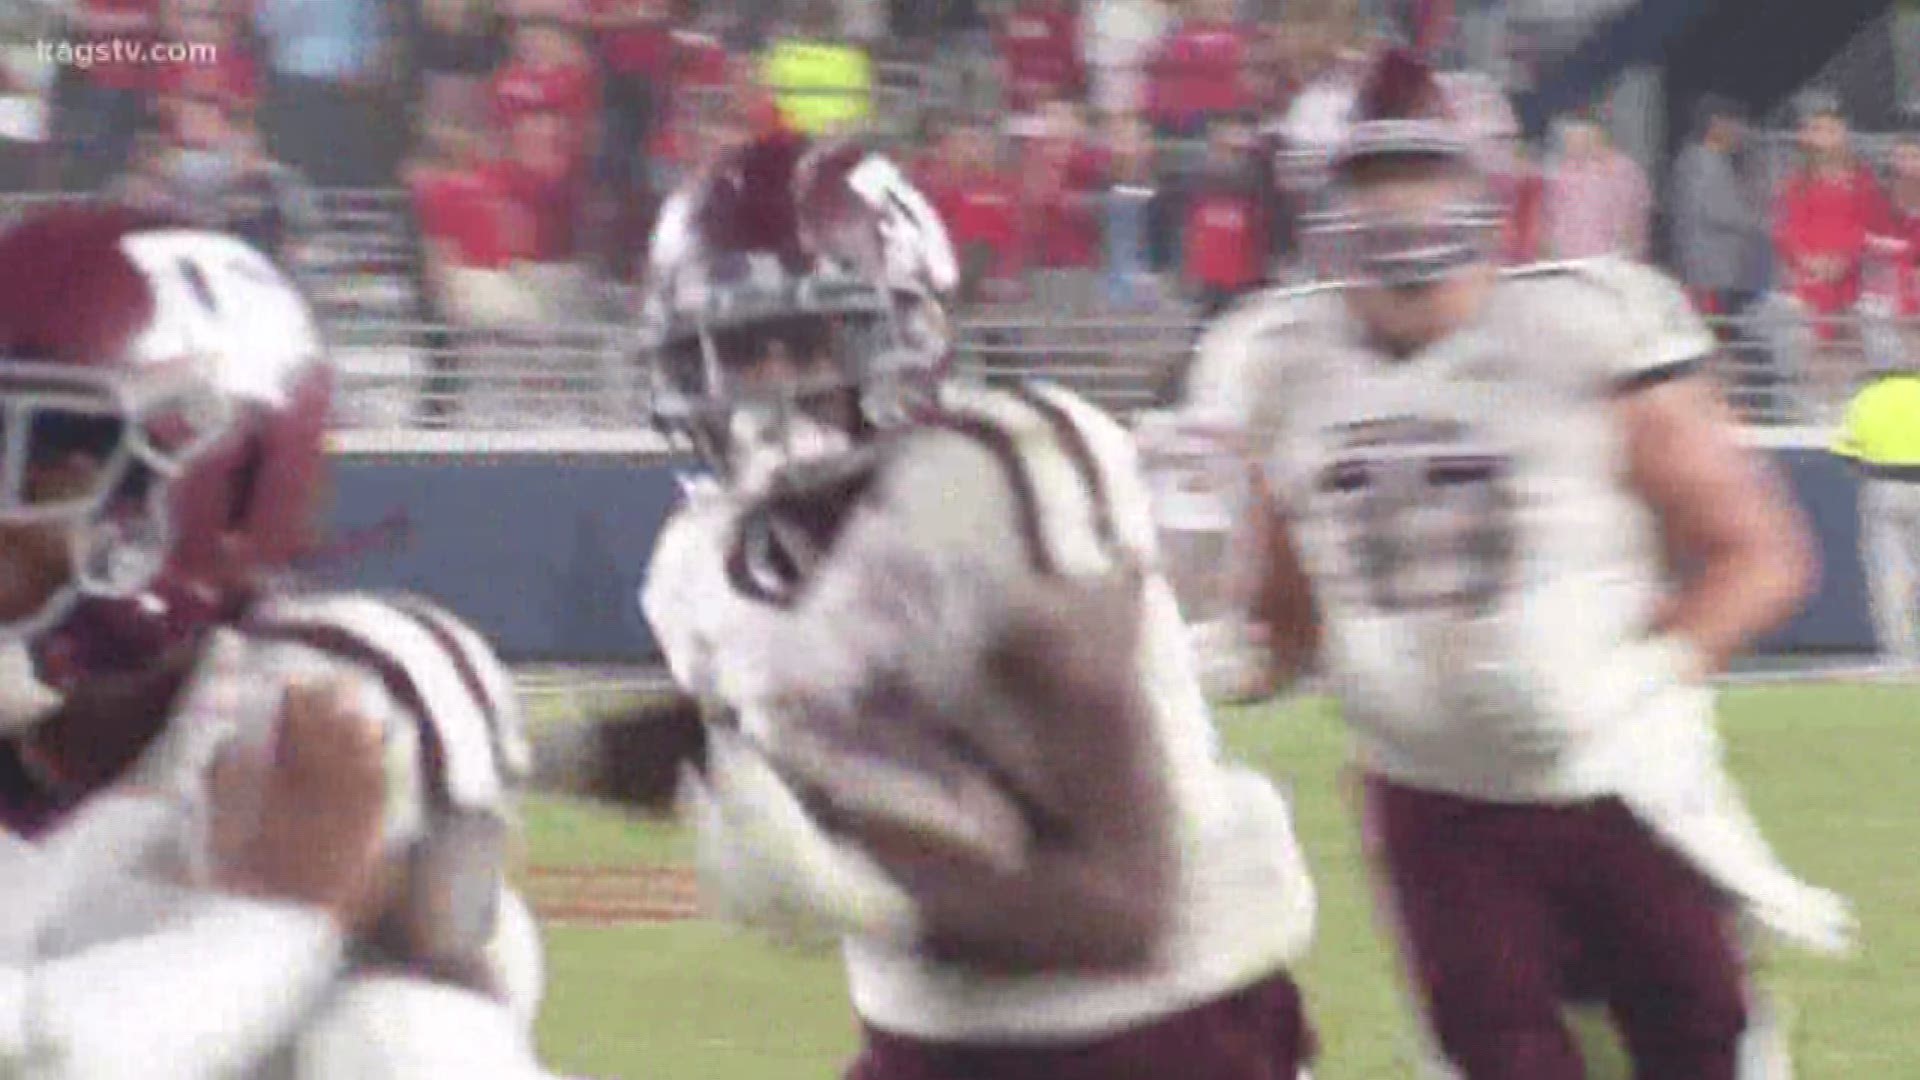 Aggie running back Isaiah Spiller was named to the SEC All-Freshman team and now Spiller is working hard to make sure he's even better in year two.